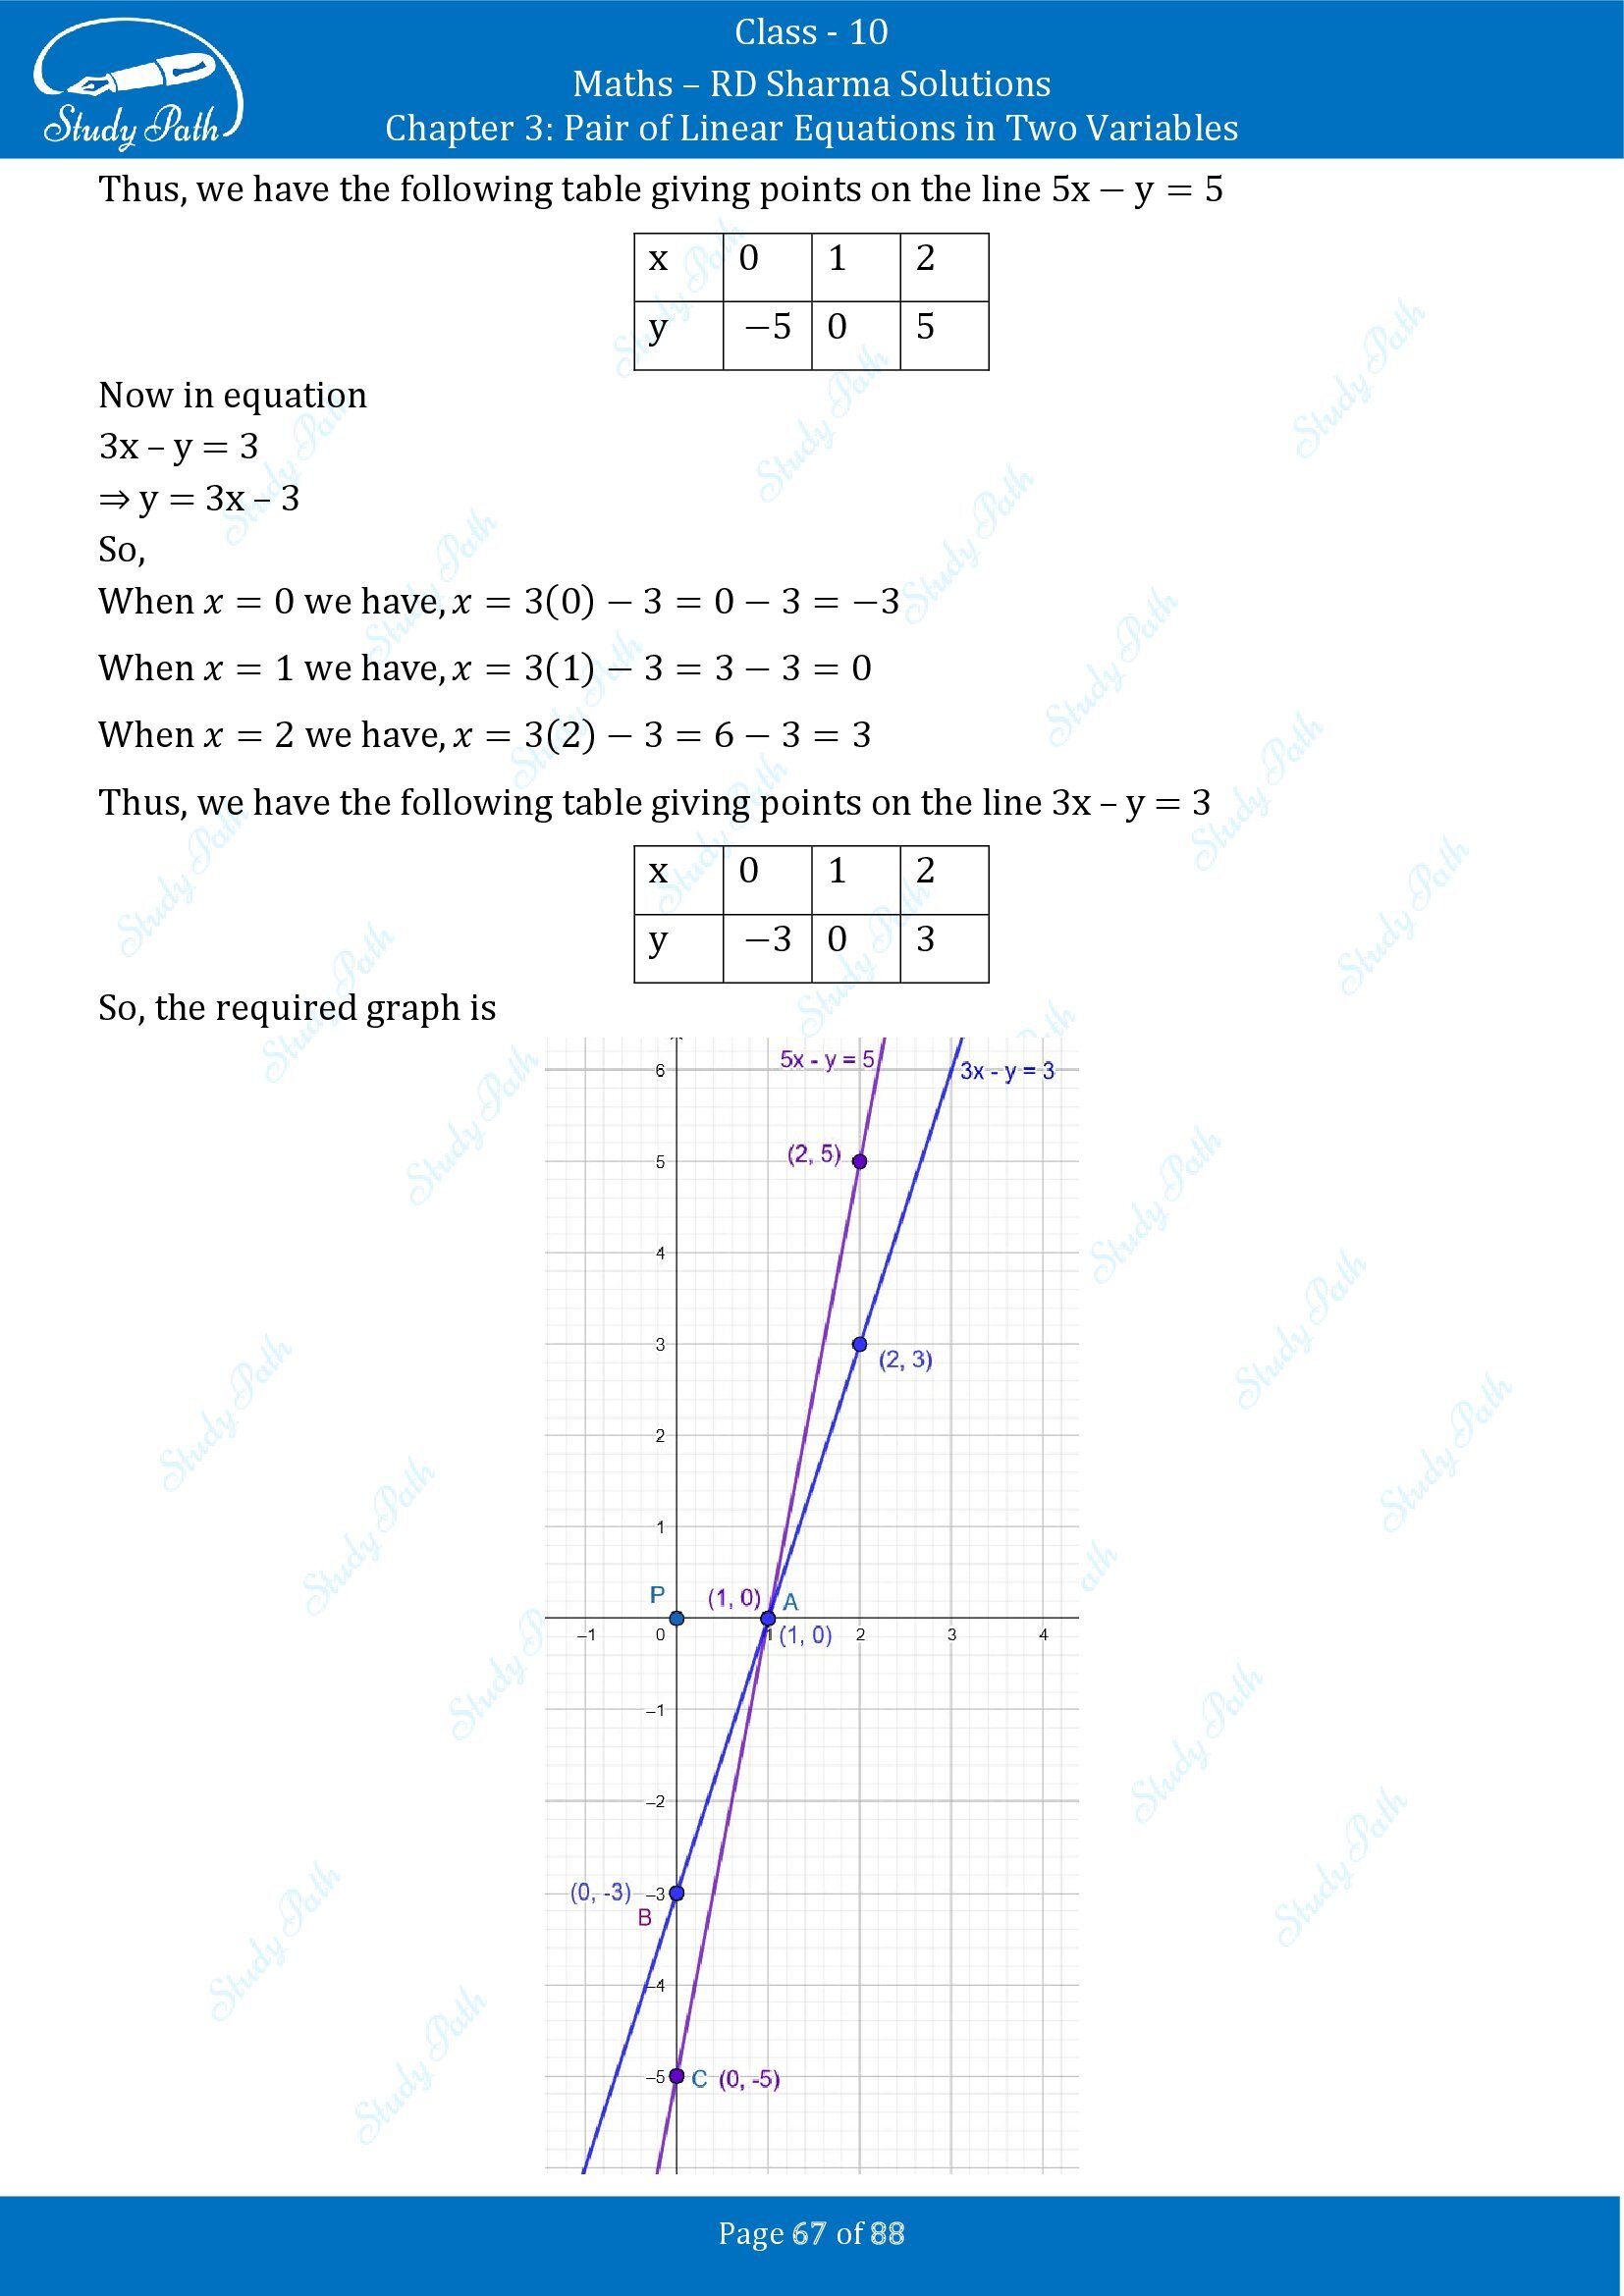 RD Sharma Solutions Class 10 Chapter 3 Pair of Linear Equations in Two Variables Exercise 3.2 00067